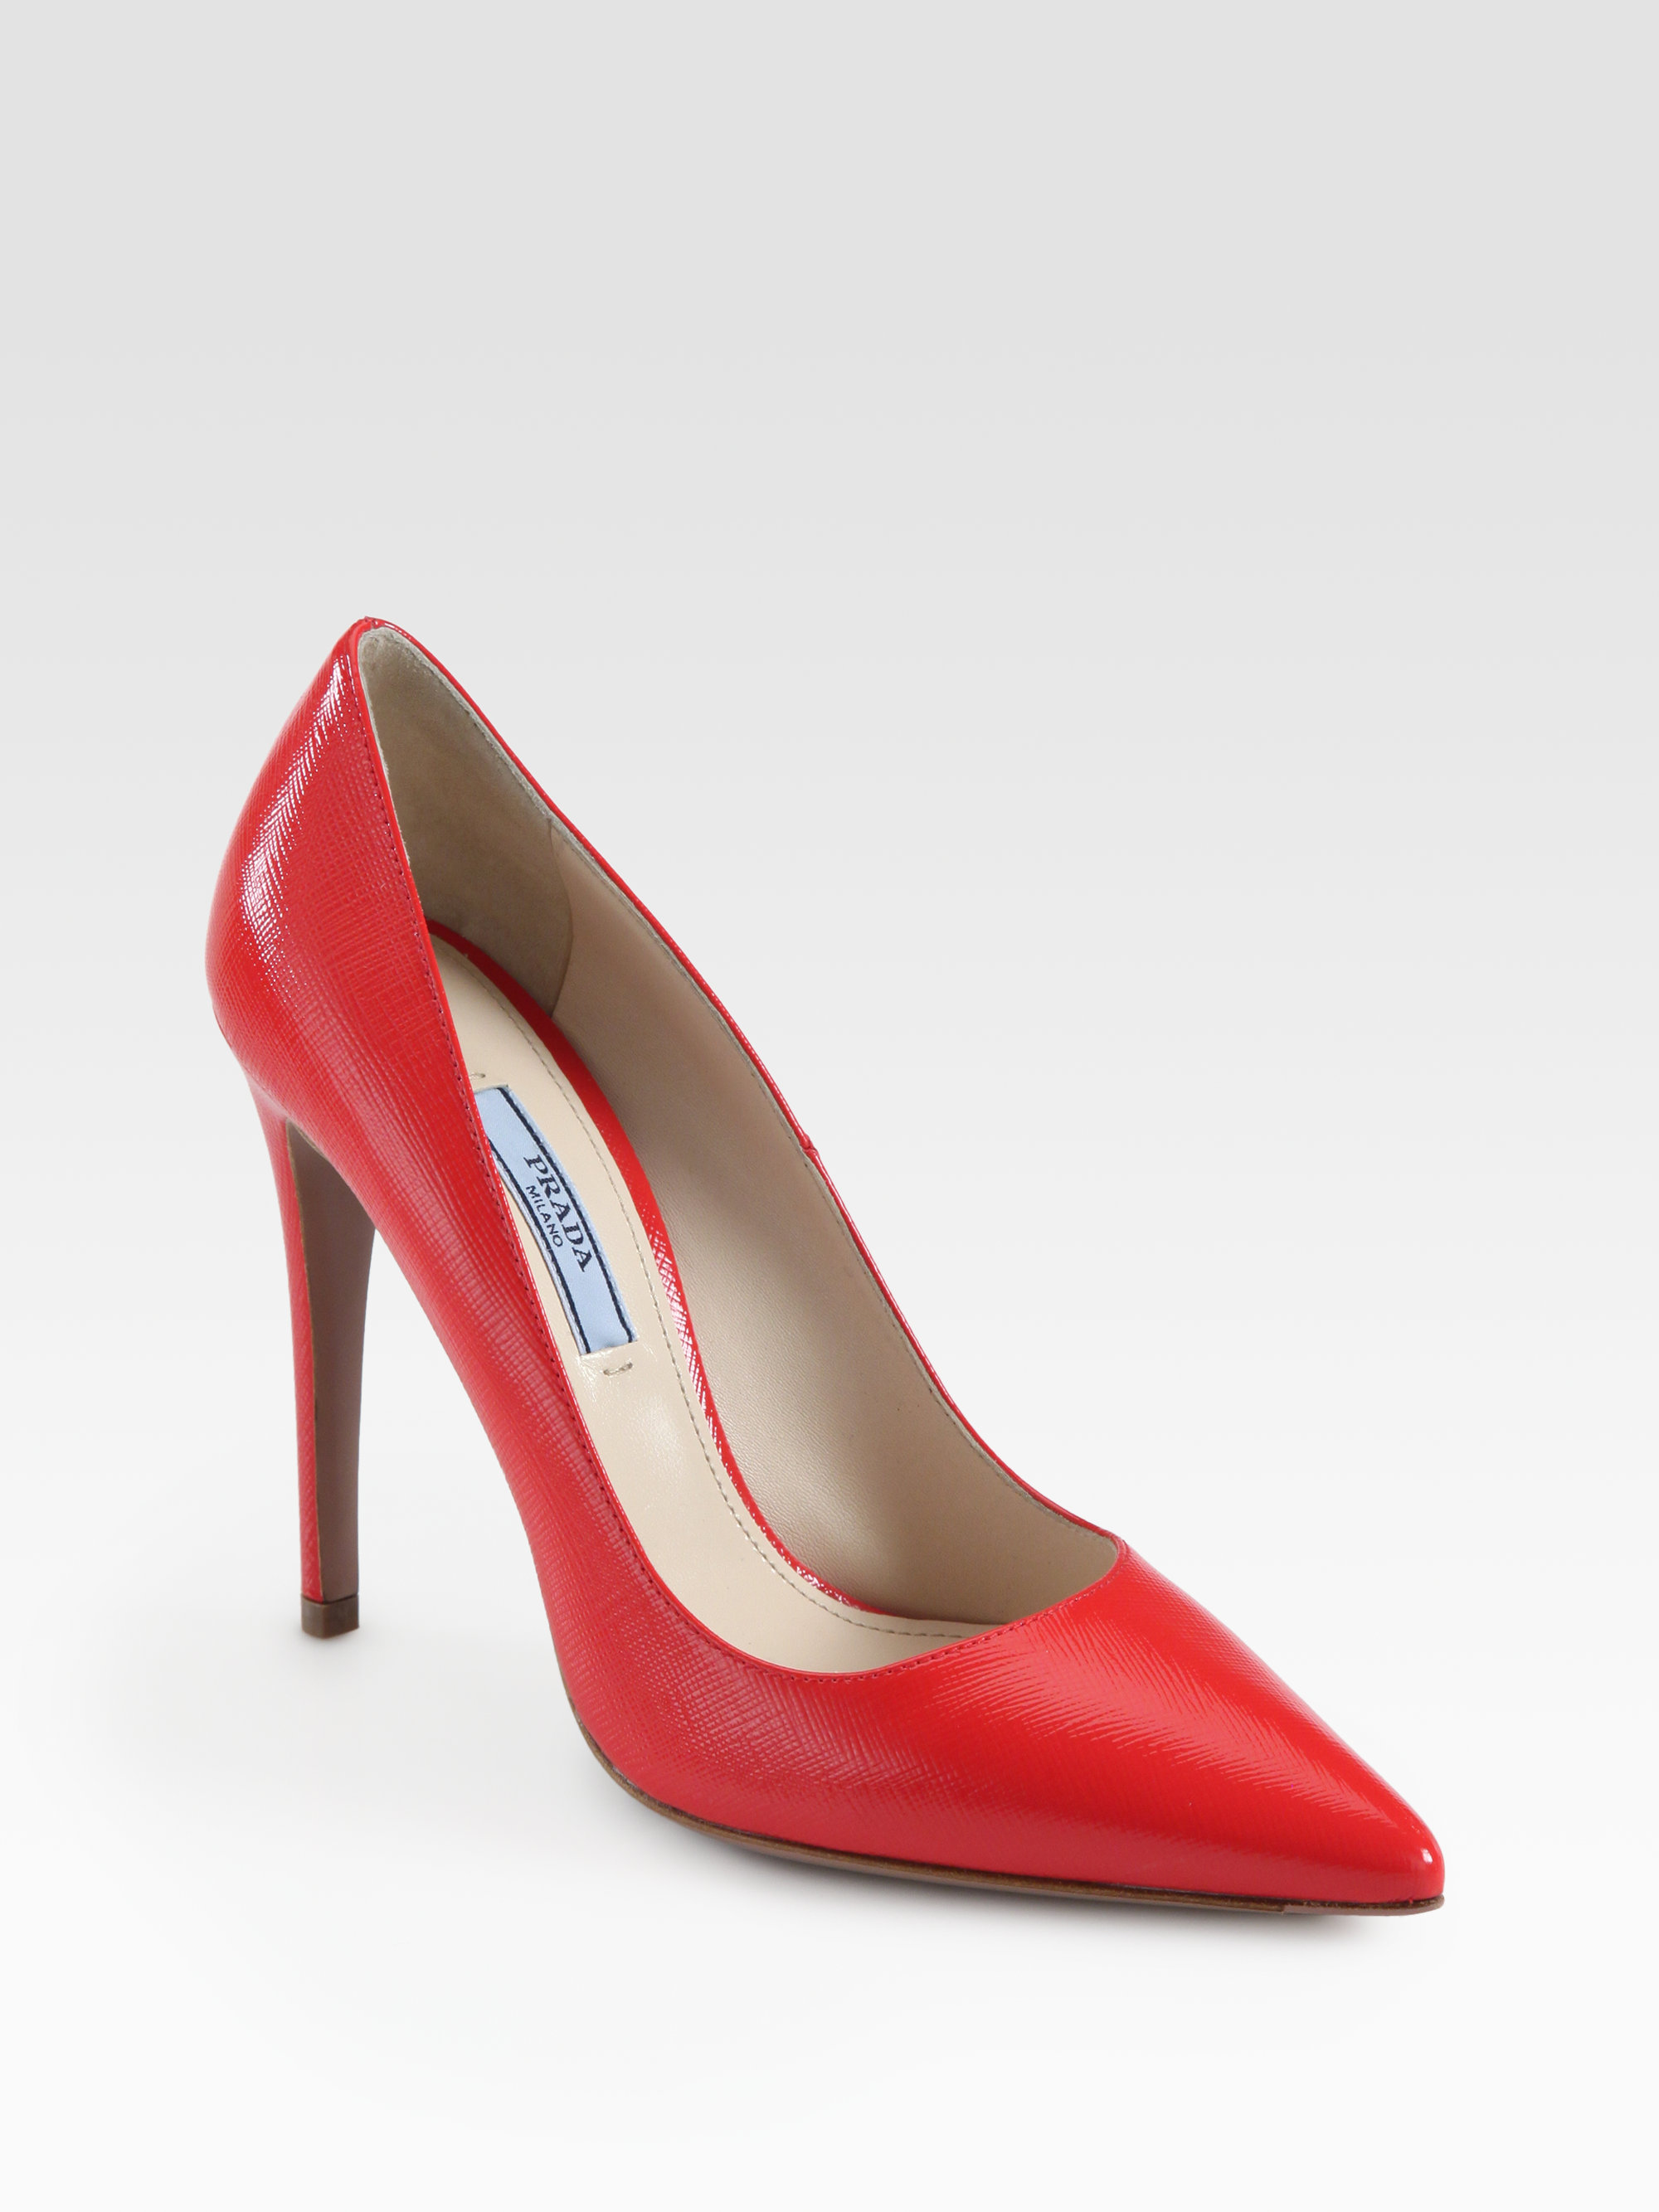 Prada Saffiano Leather Pumps in Red Lyst